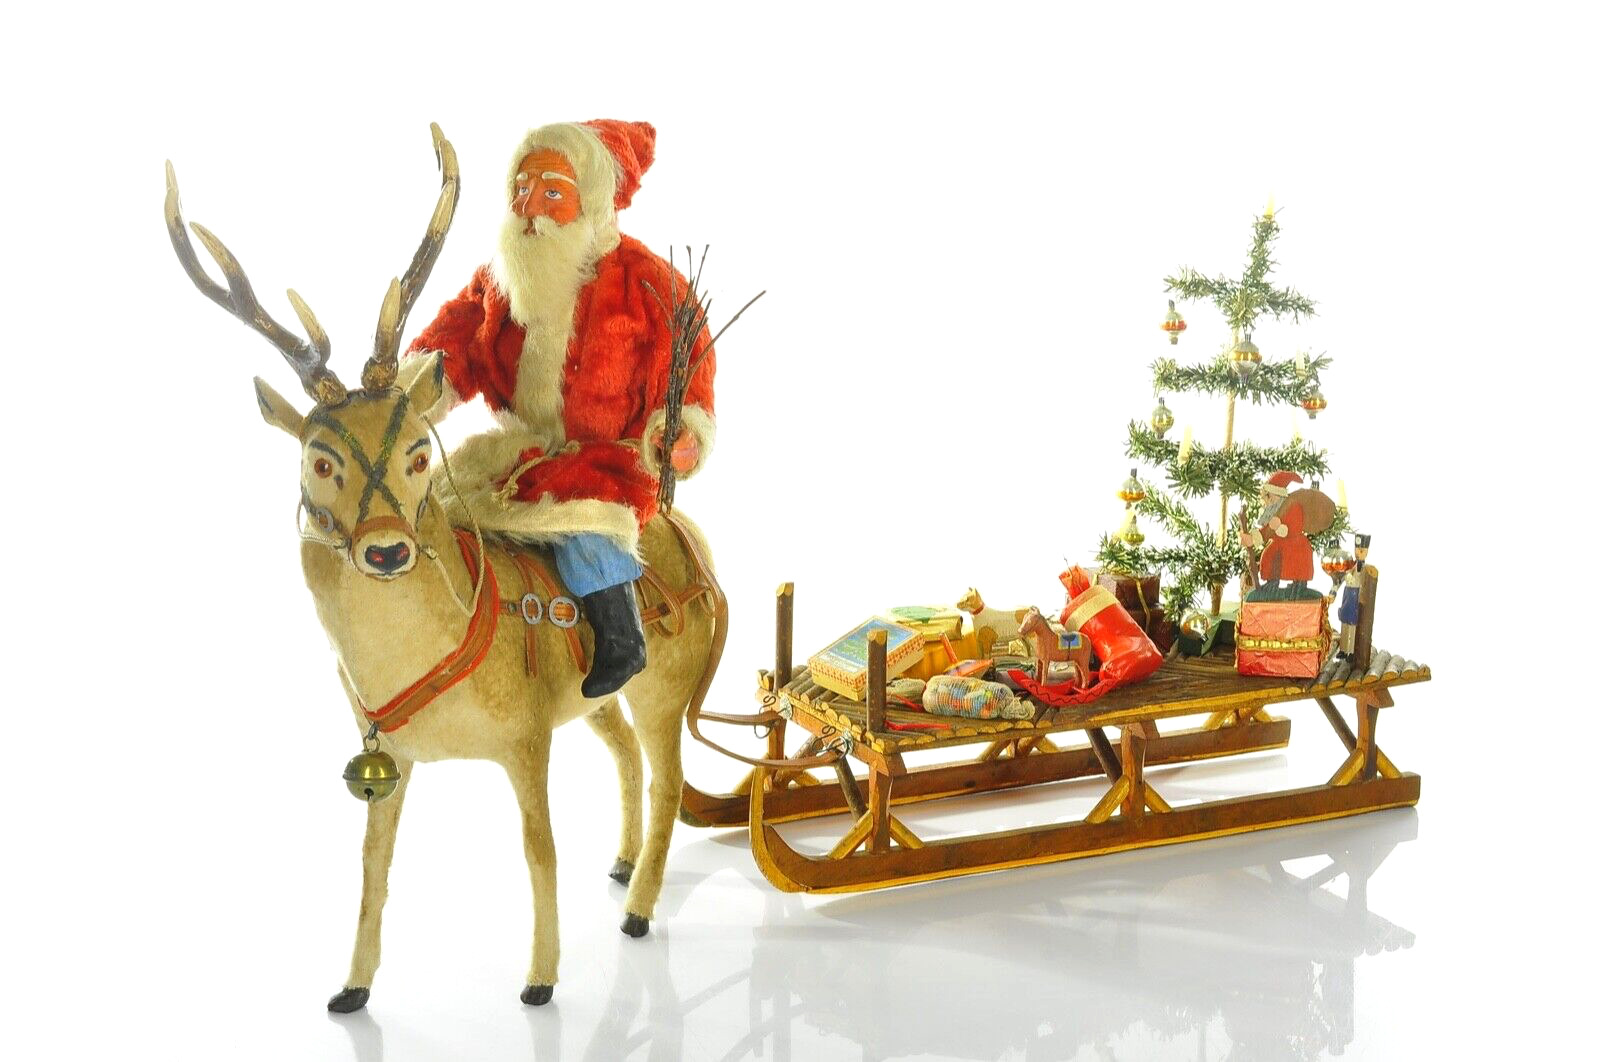 Amazing German Santa Claus/ Belsnickel Reindeer Candy Container and Sleigh 1900